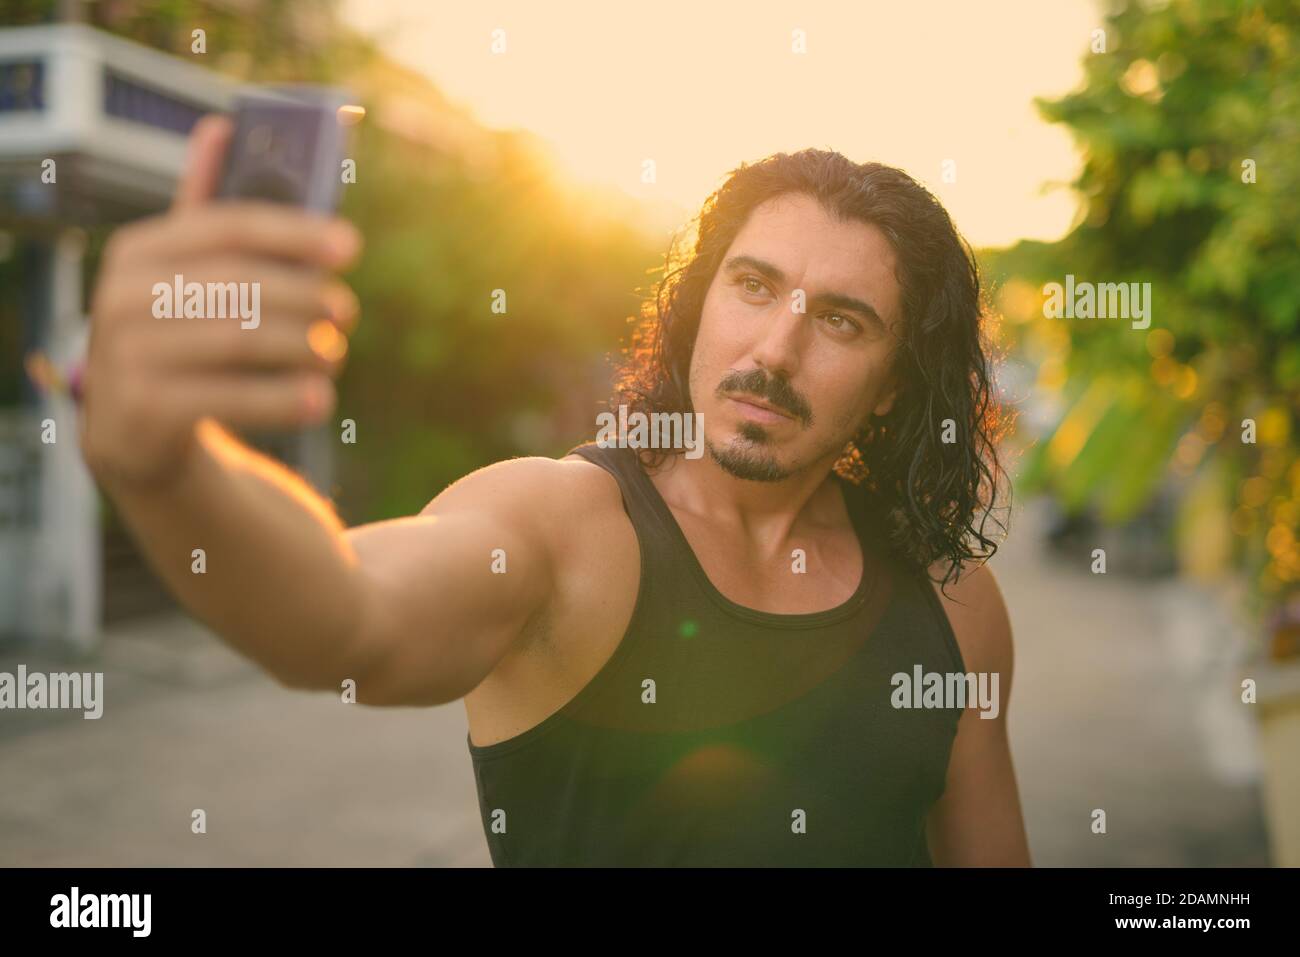 Handsome man with curly hair and mustache in the streets outdoors Stock Photo